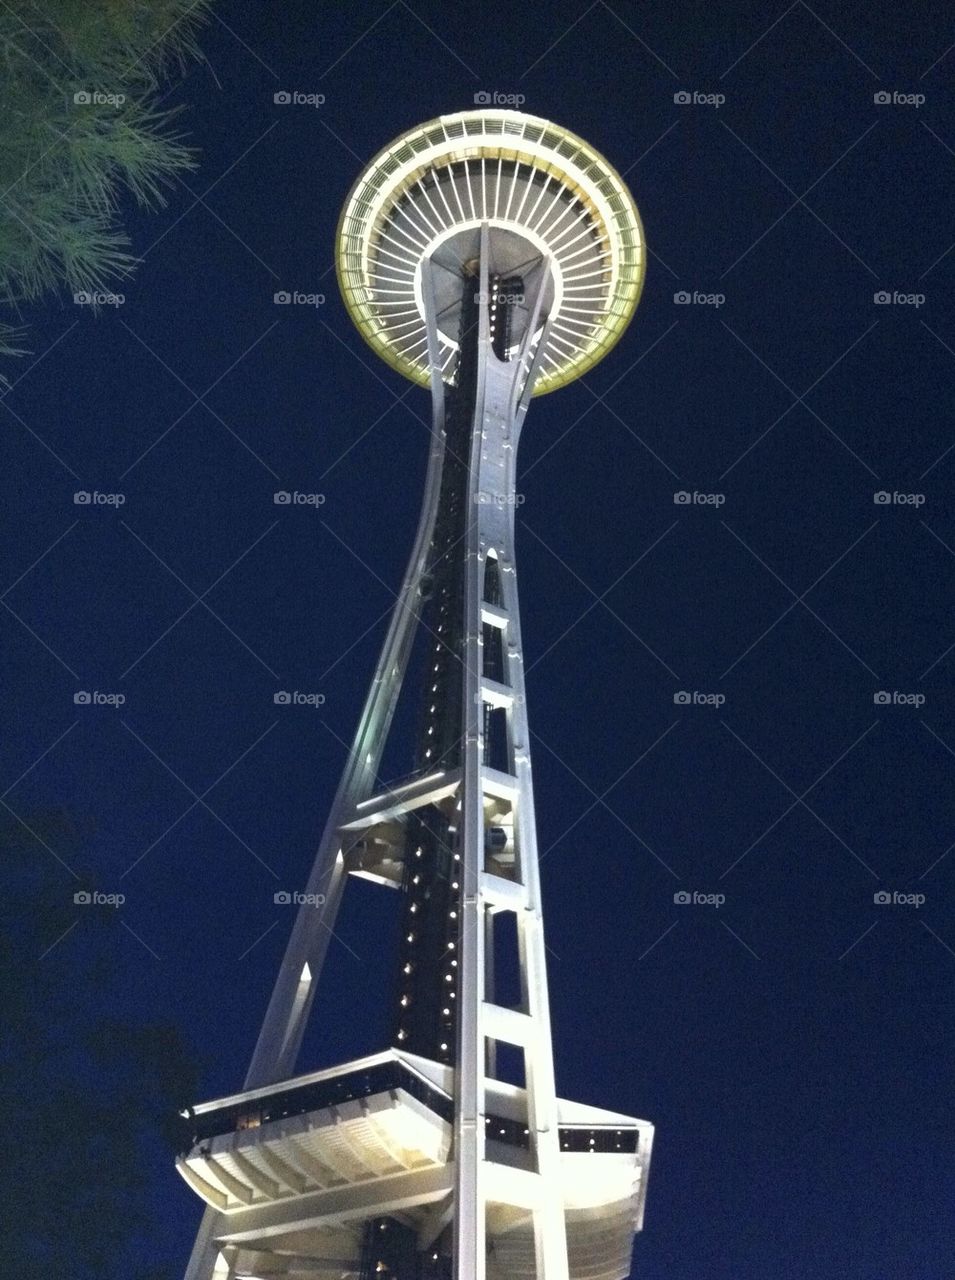 Under the Space Needle